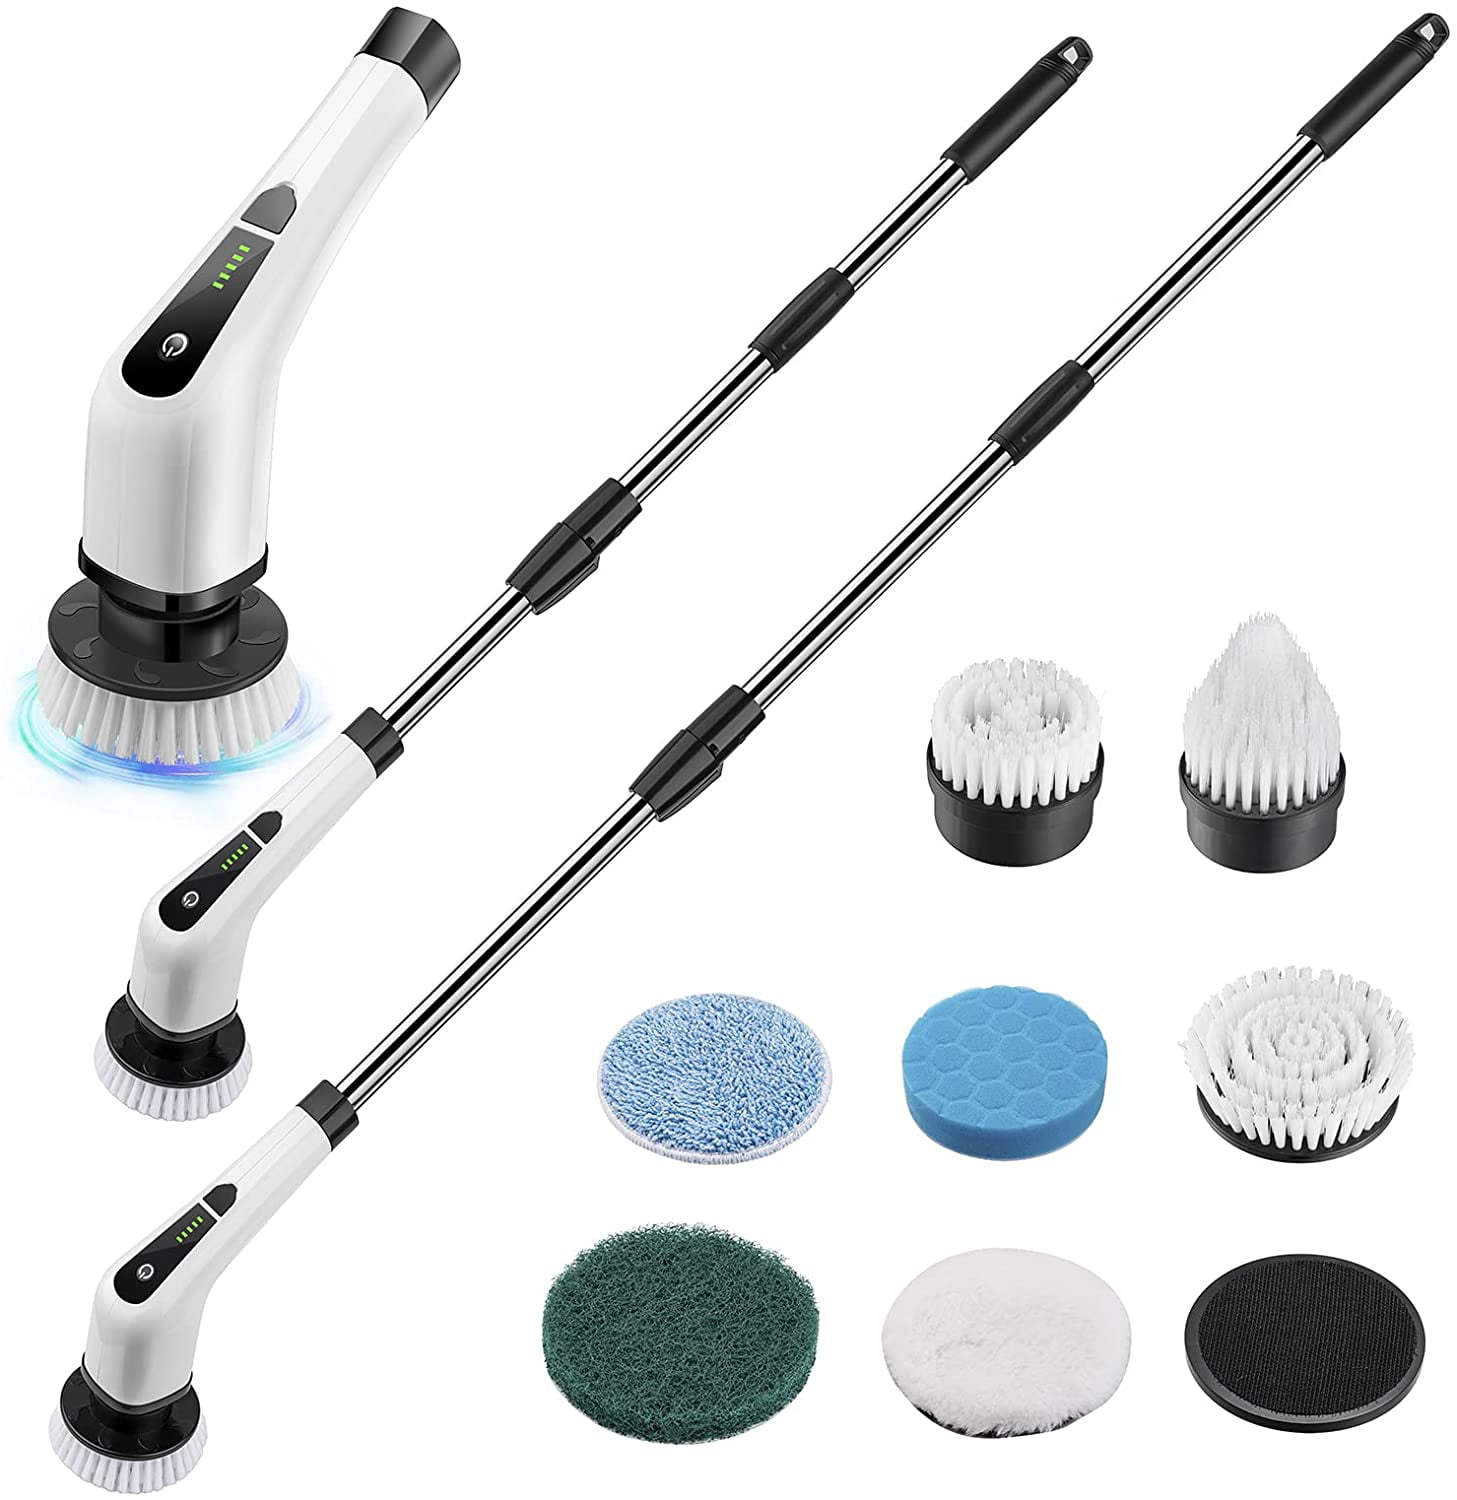 Electric Spin Scrubber for Cleaning Bathroom: Cordless Power Shower Bath  Tub and Tiles Cleaning Brush | 10 in 1 Handheld Automatic Long Handle  Battery